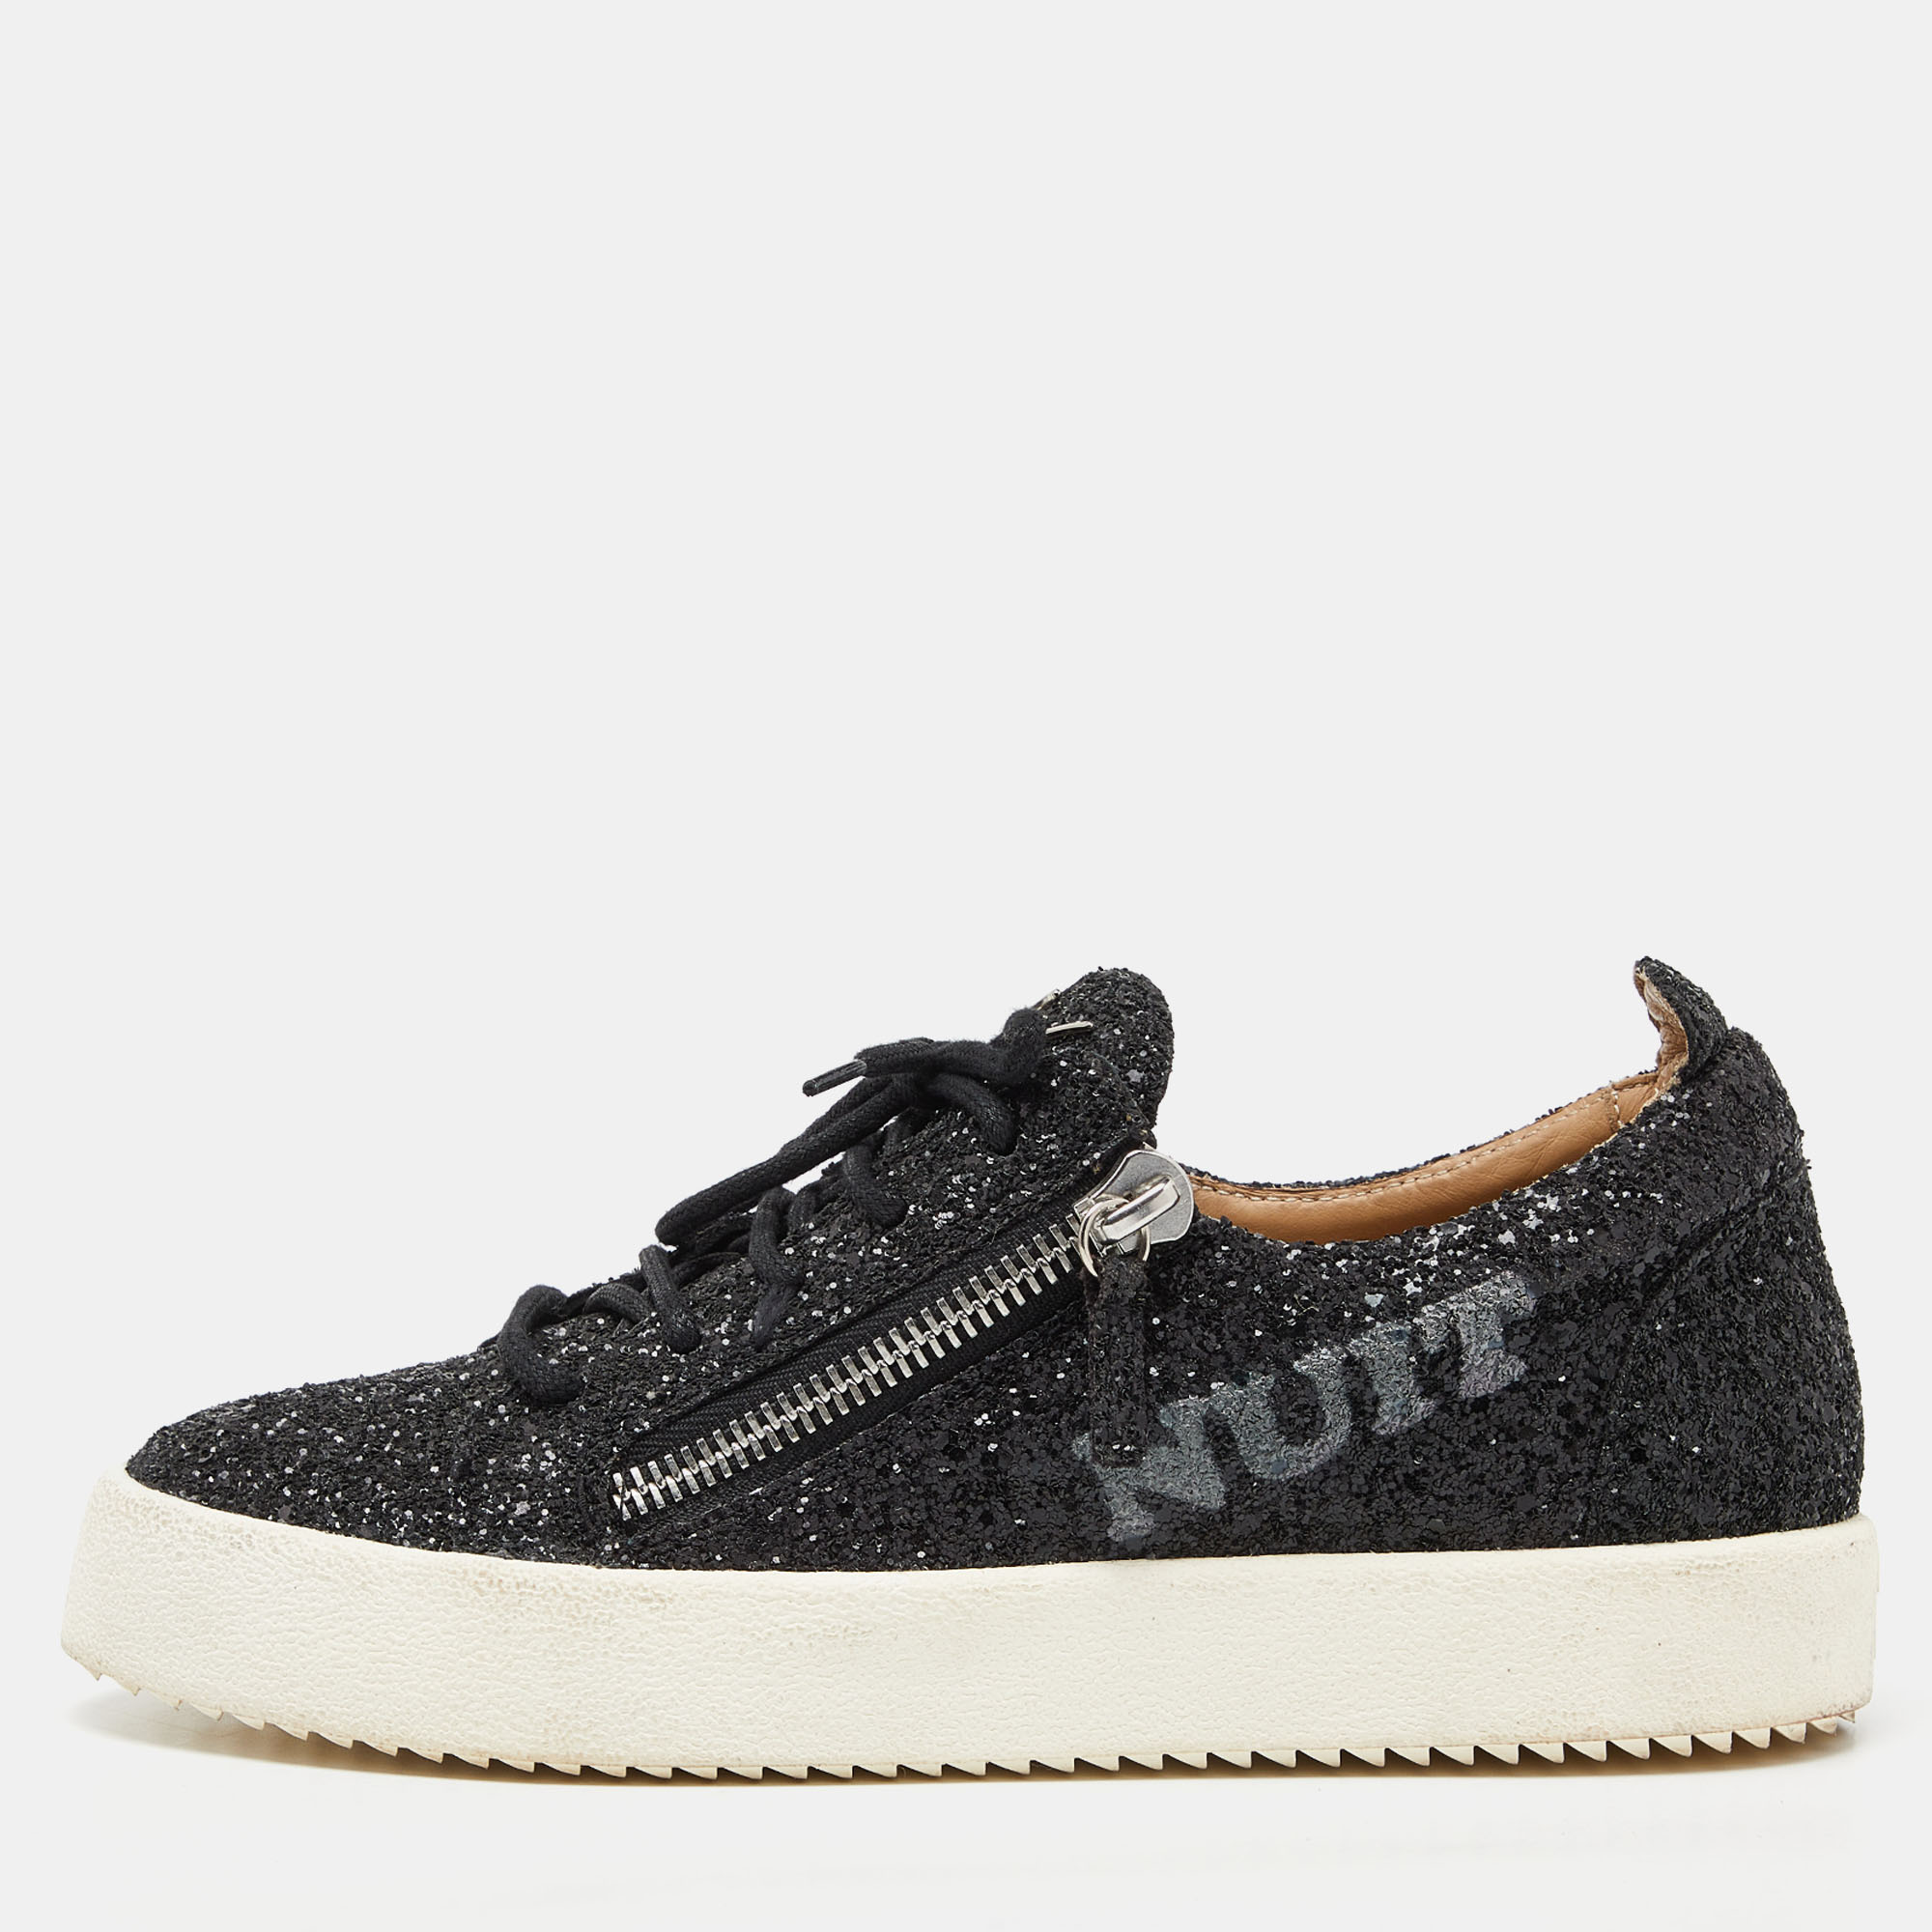 These low top sneakers from Giuseppe Zanotti are gorgeous. They have been crafted from black glitter and detailed with double zippers on the sides and brand logos on the tongues. Comfortable leather lined insoles and durable rubber soles complete this fabulous pair.